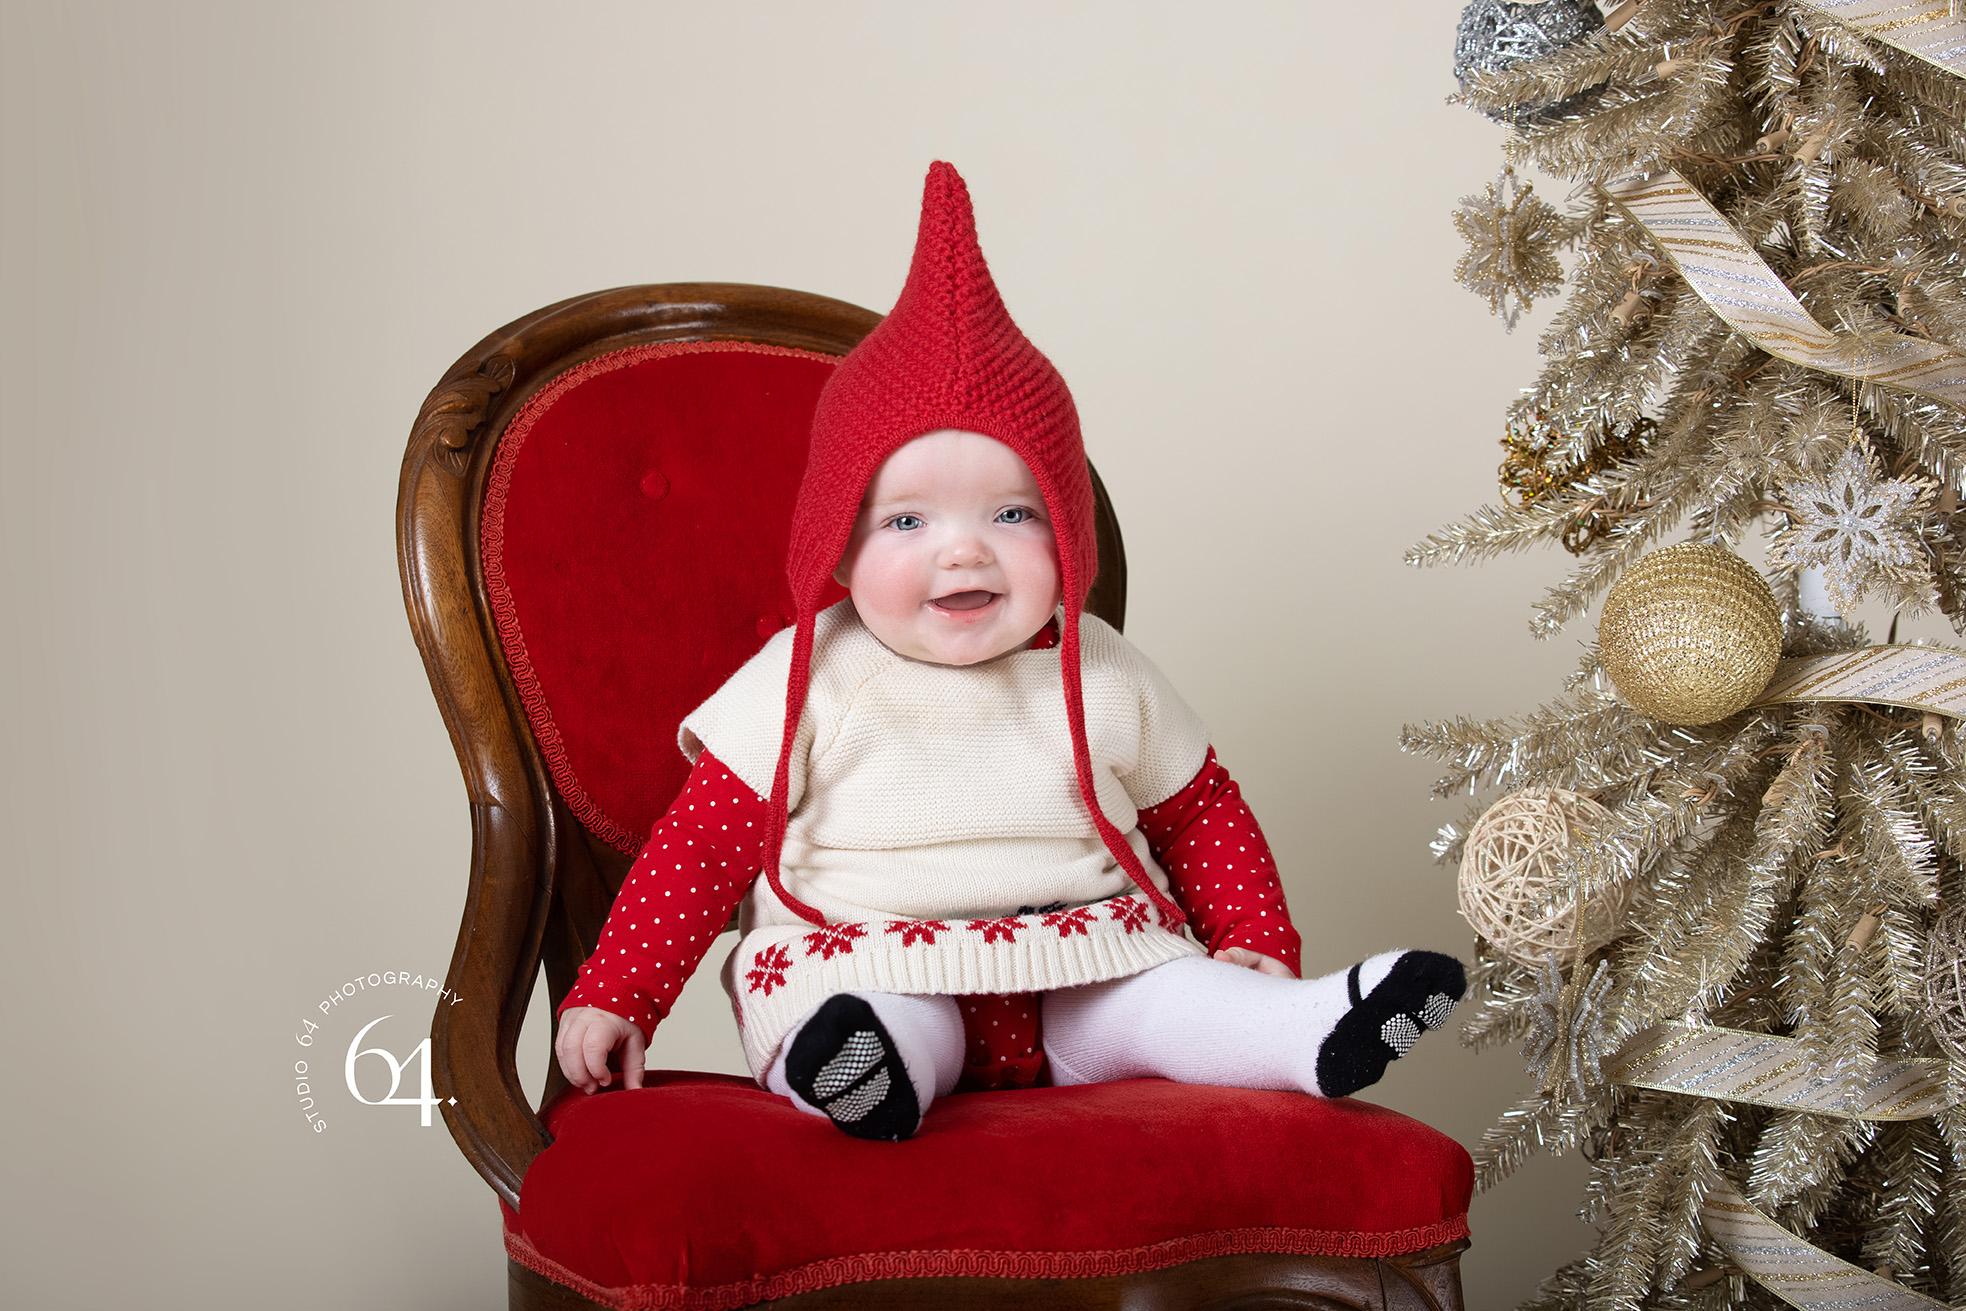 Little Girl sitting on a red chair with a red stocking cap on next to a Christmas Tree